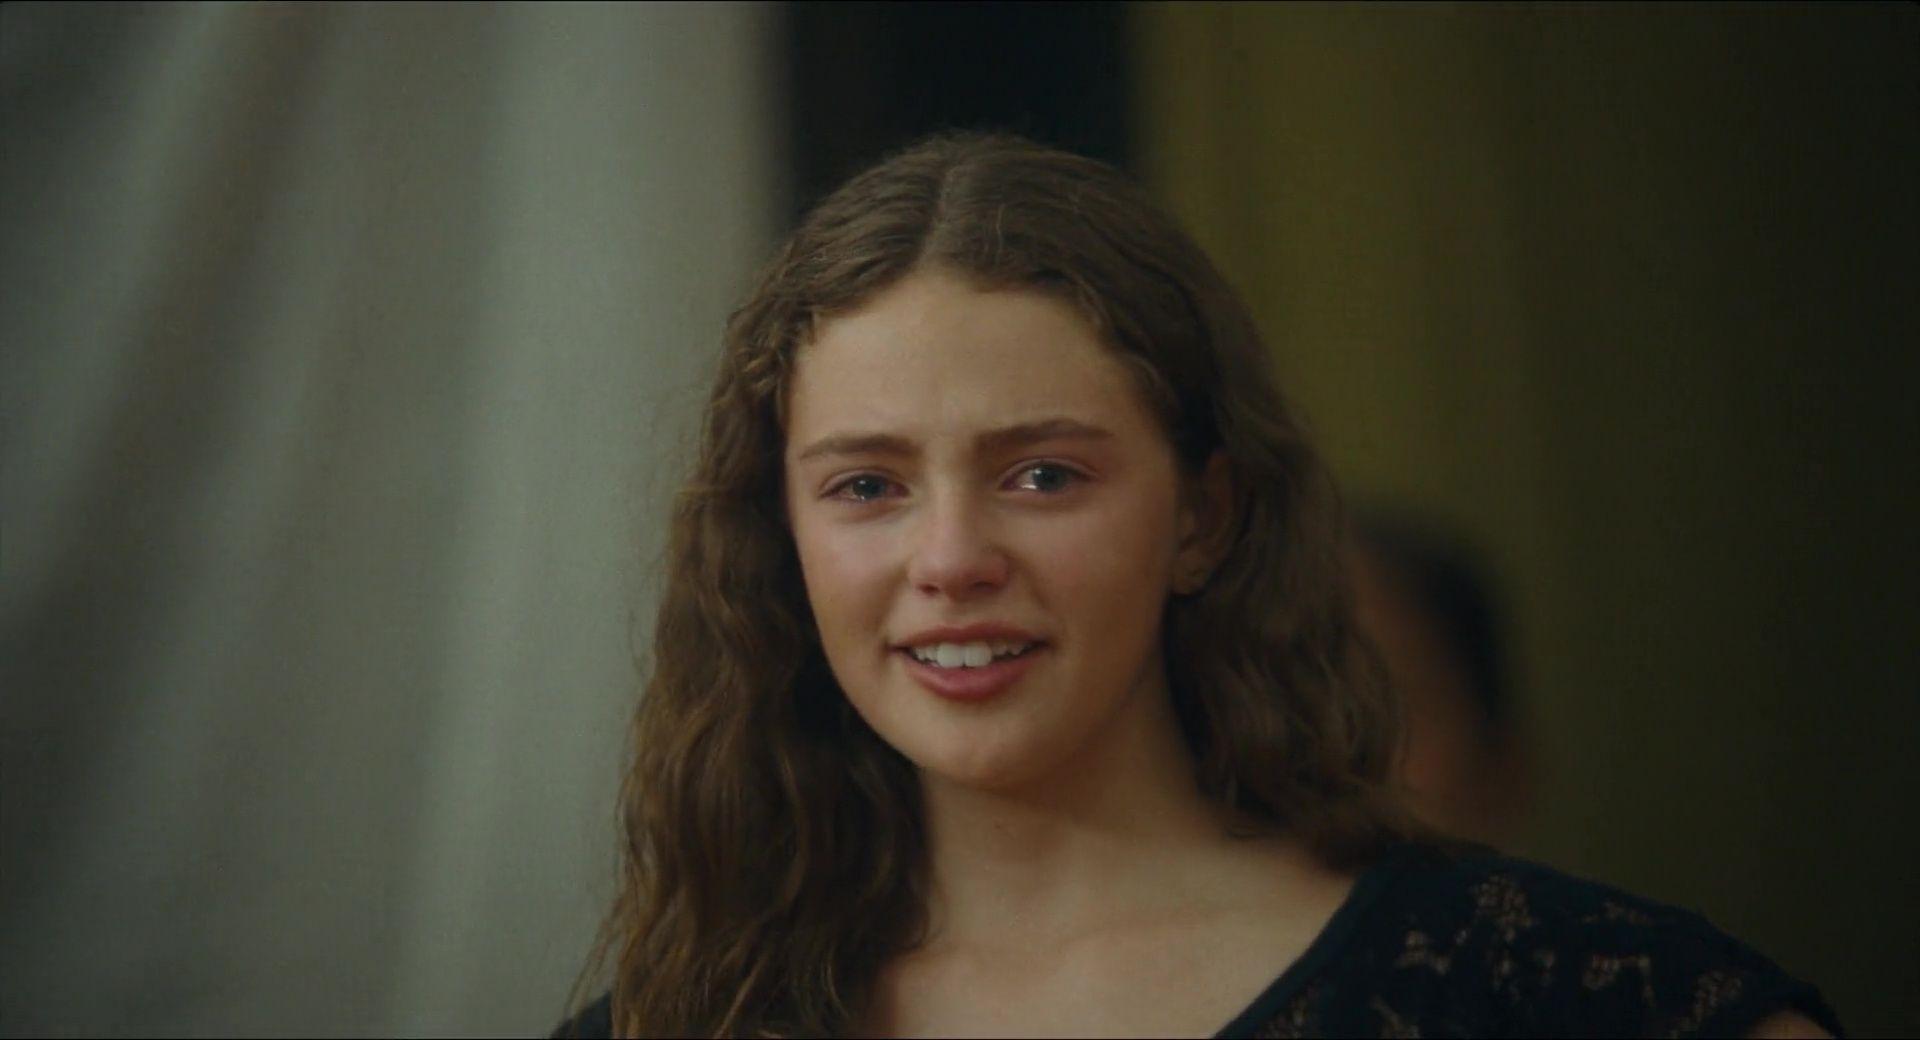 Danielle Rose Russell in the film 'Aloha' (2015). The Seventh Art